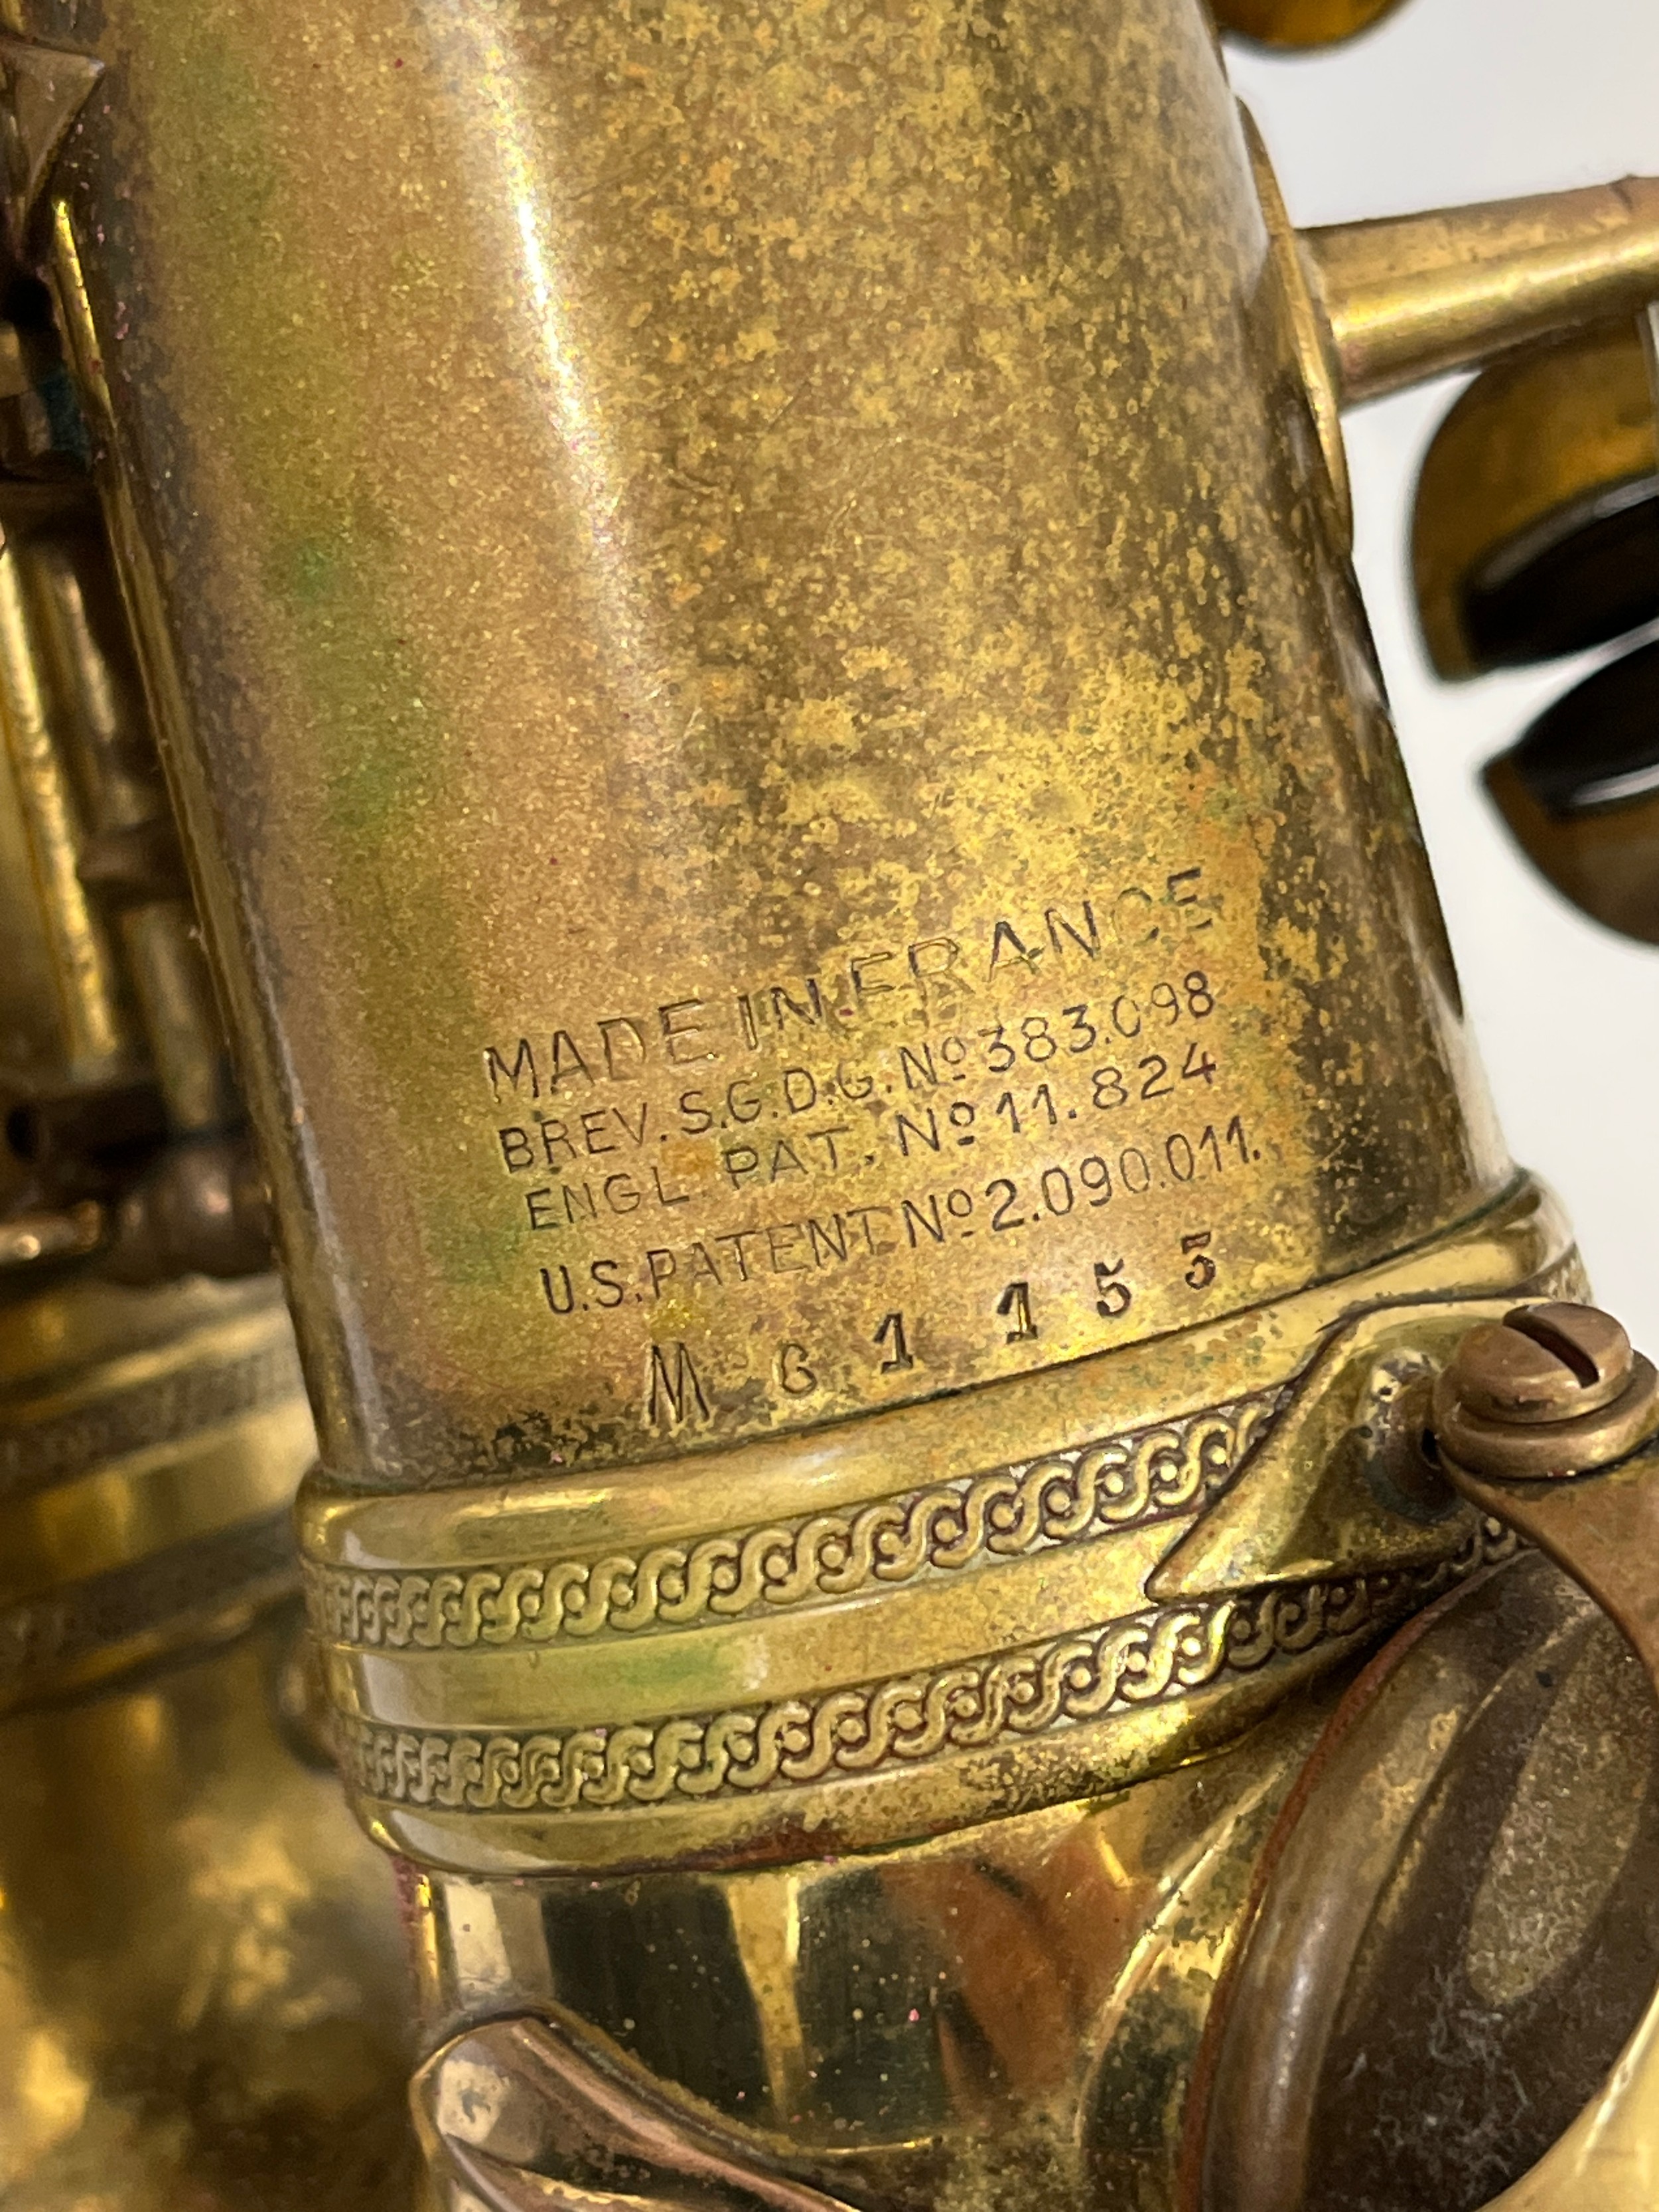 A 1955 Selmer Super Action alto saxophone serial no. M61153, hard cased - Image 4 of 4